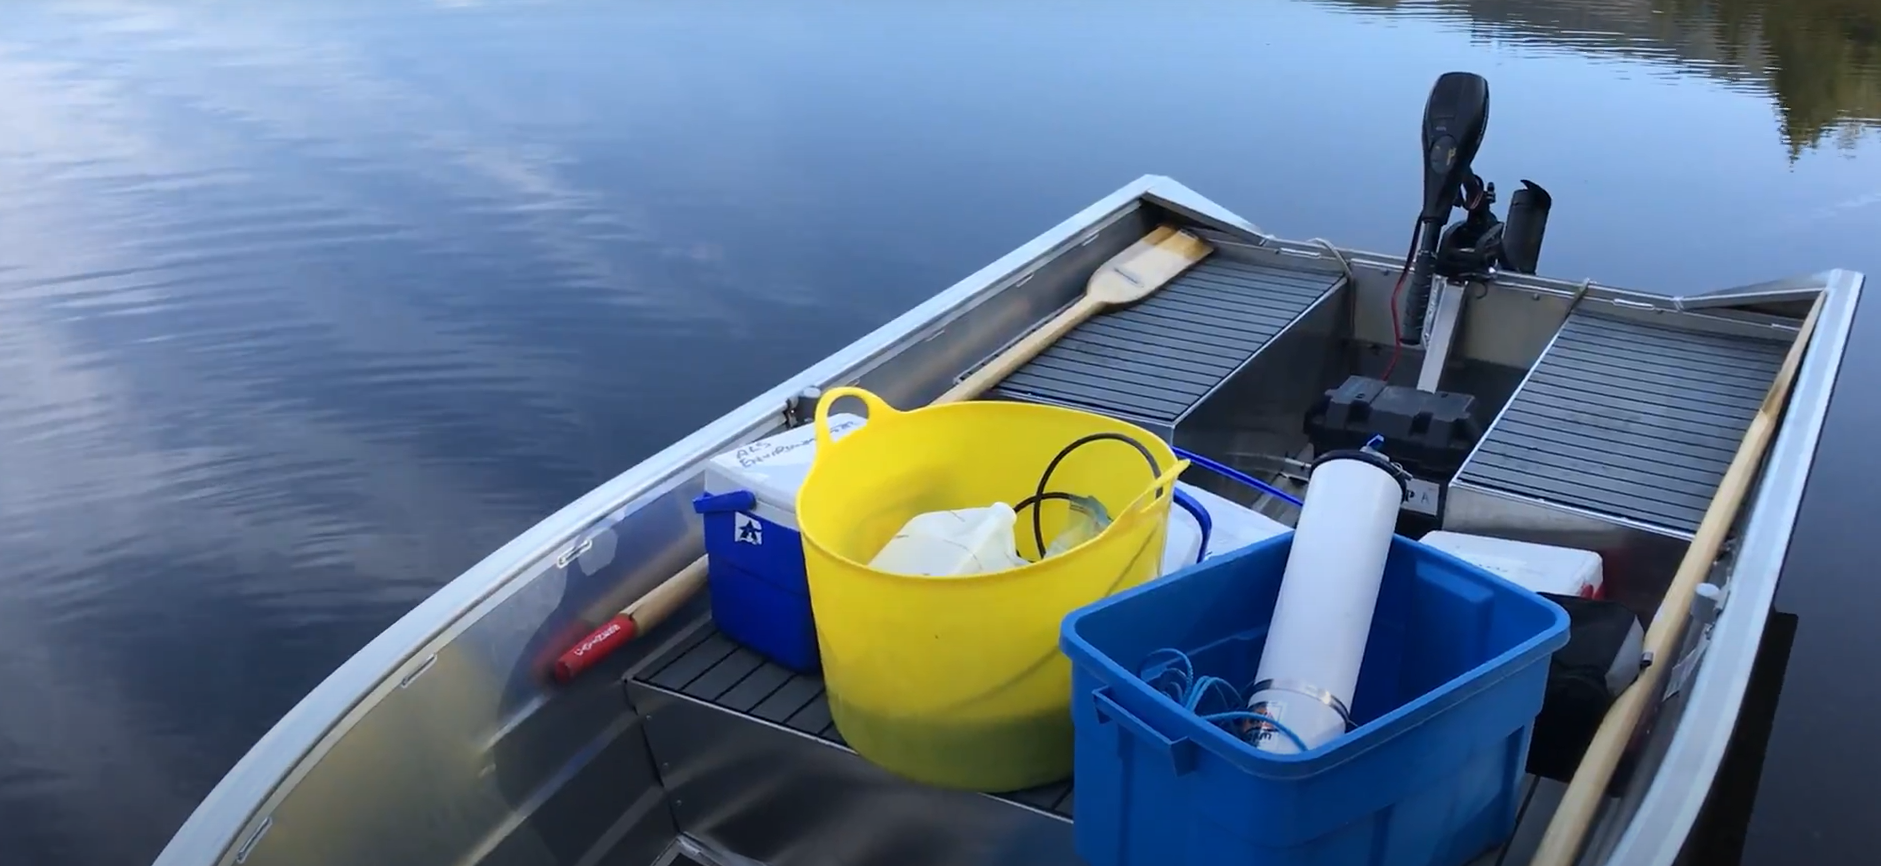 Small powerboat on the water with lake monitoring equipment inside it